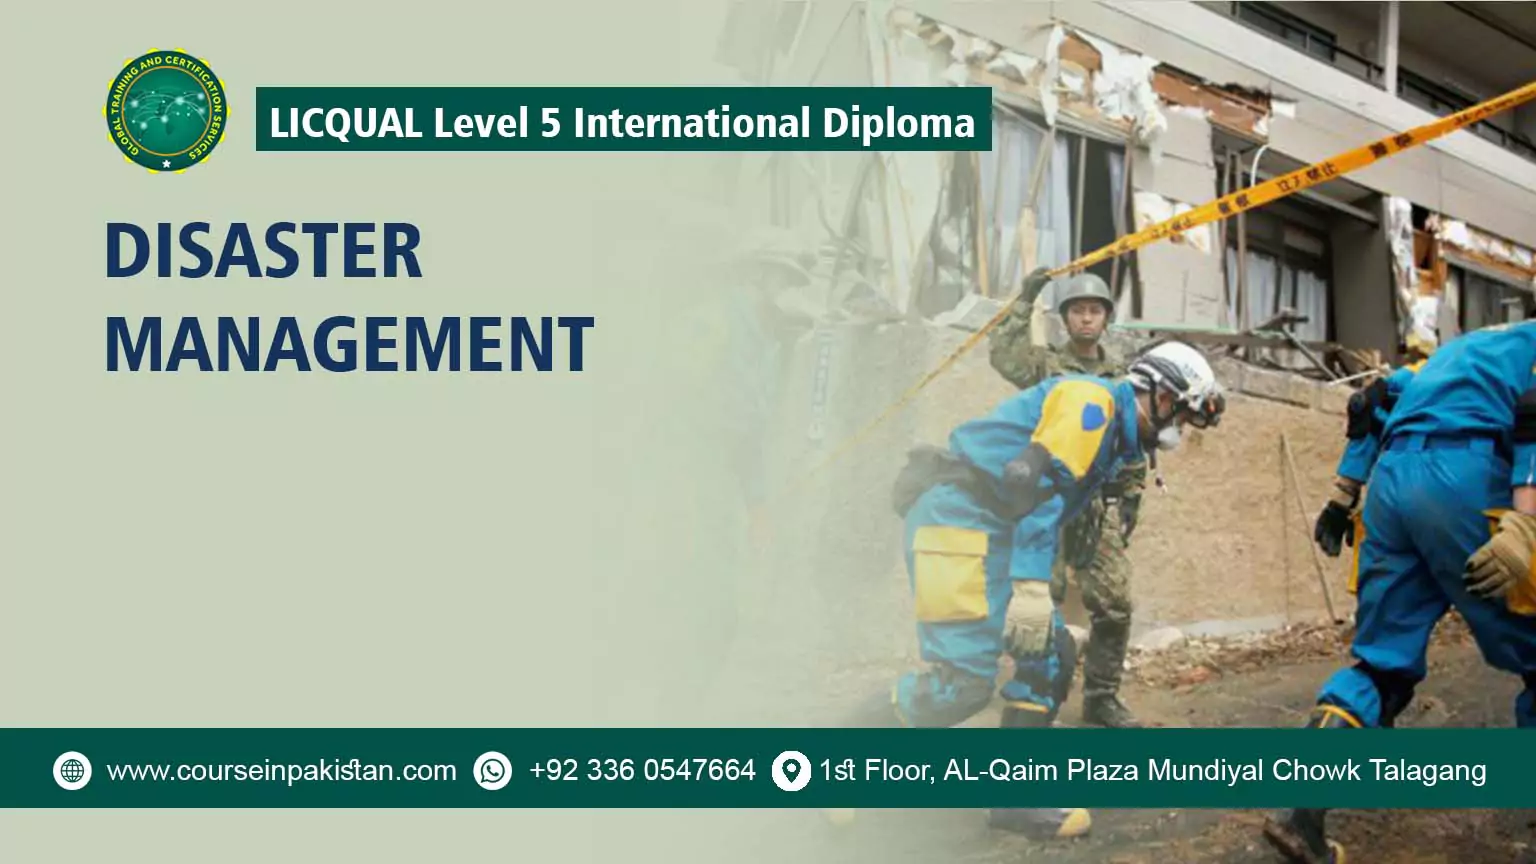 LICQual Level 5 International Diploma in Disaster Management